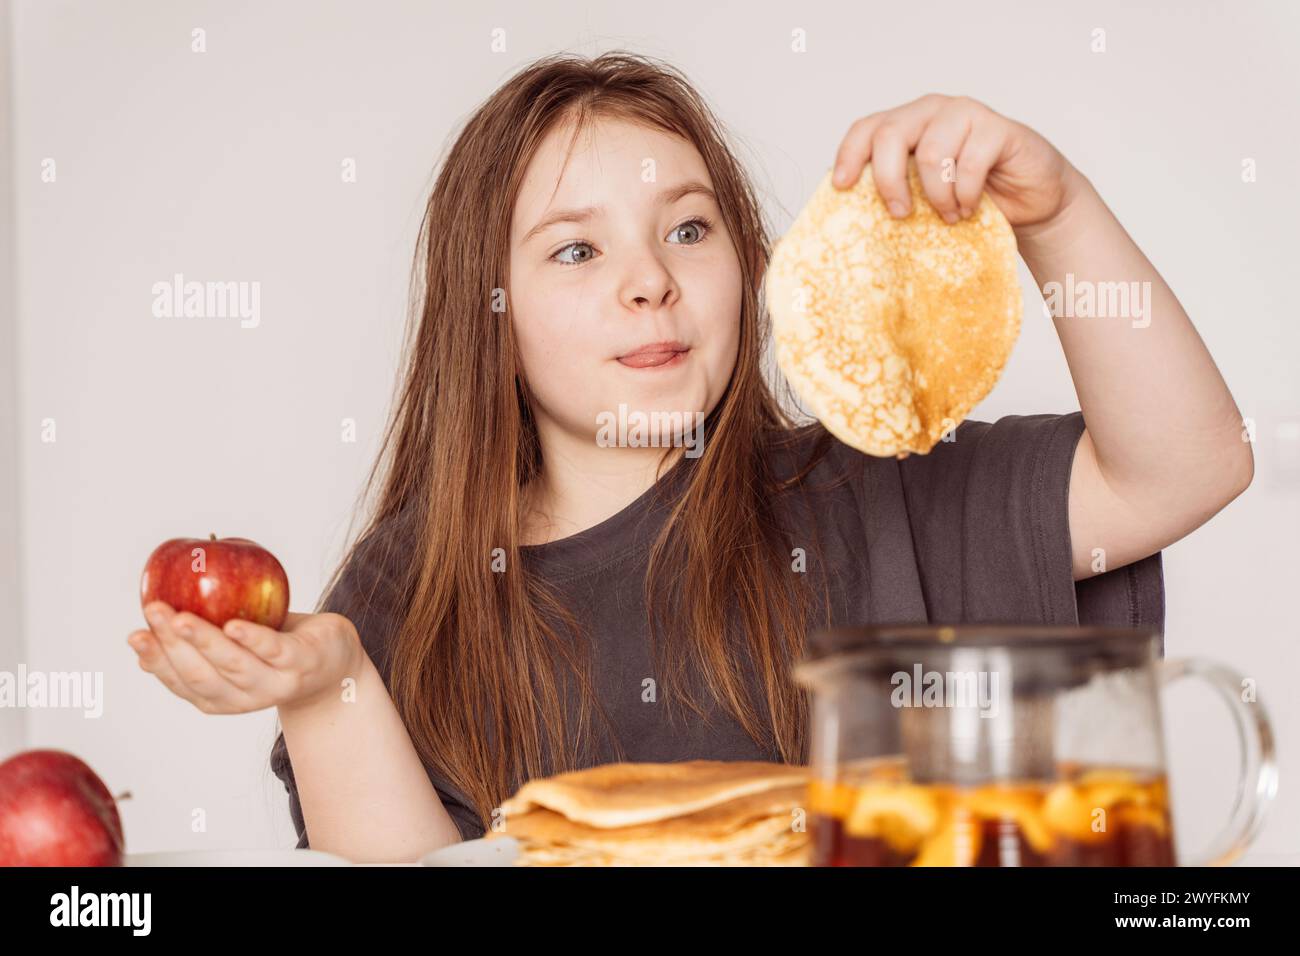 Little teenage girl holding an apple in one hand in the other pancake. The girl chooses between an apple and a pancake for breakfast, Looks licking her lips at the pancake. Food selection concept. High quality photo Stock Photo